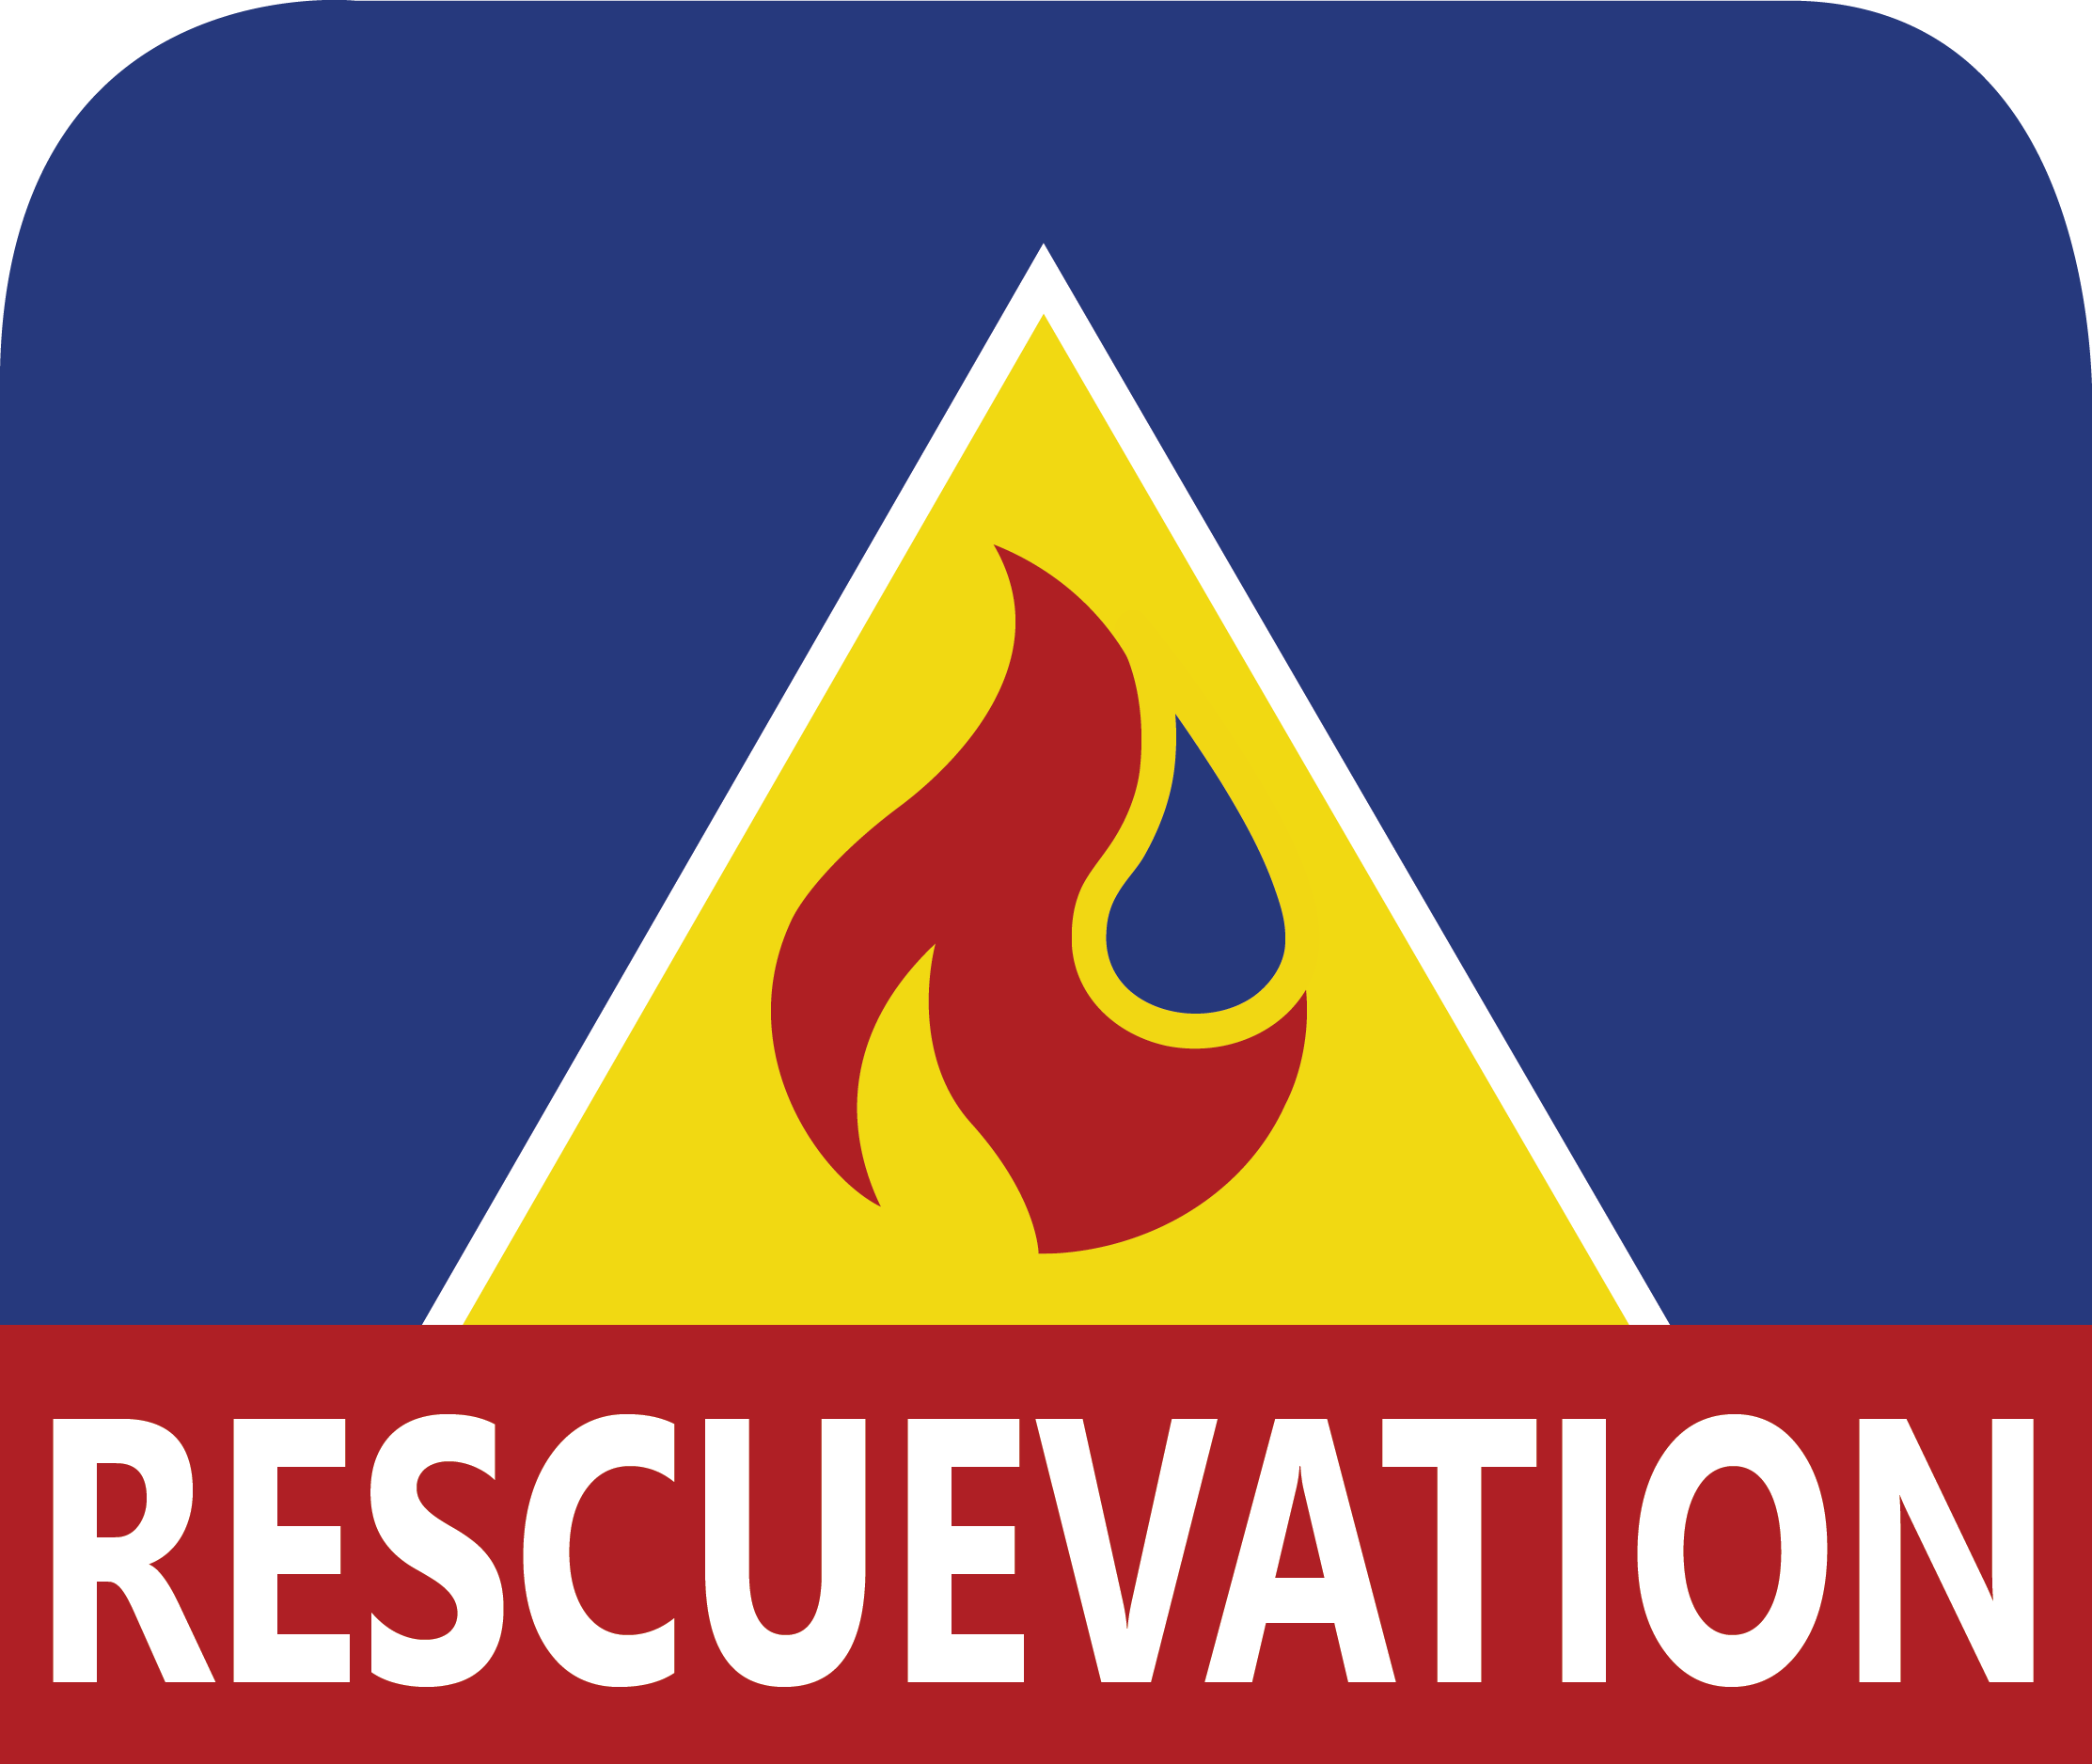 Rescuevation